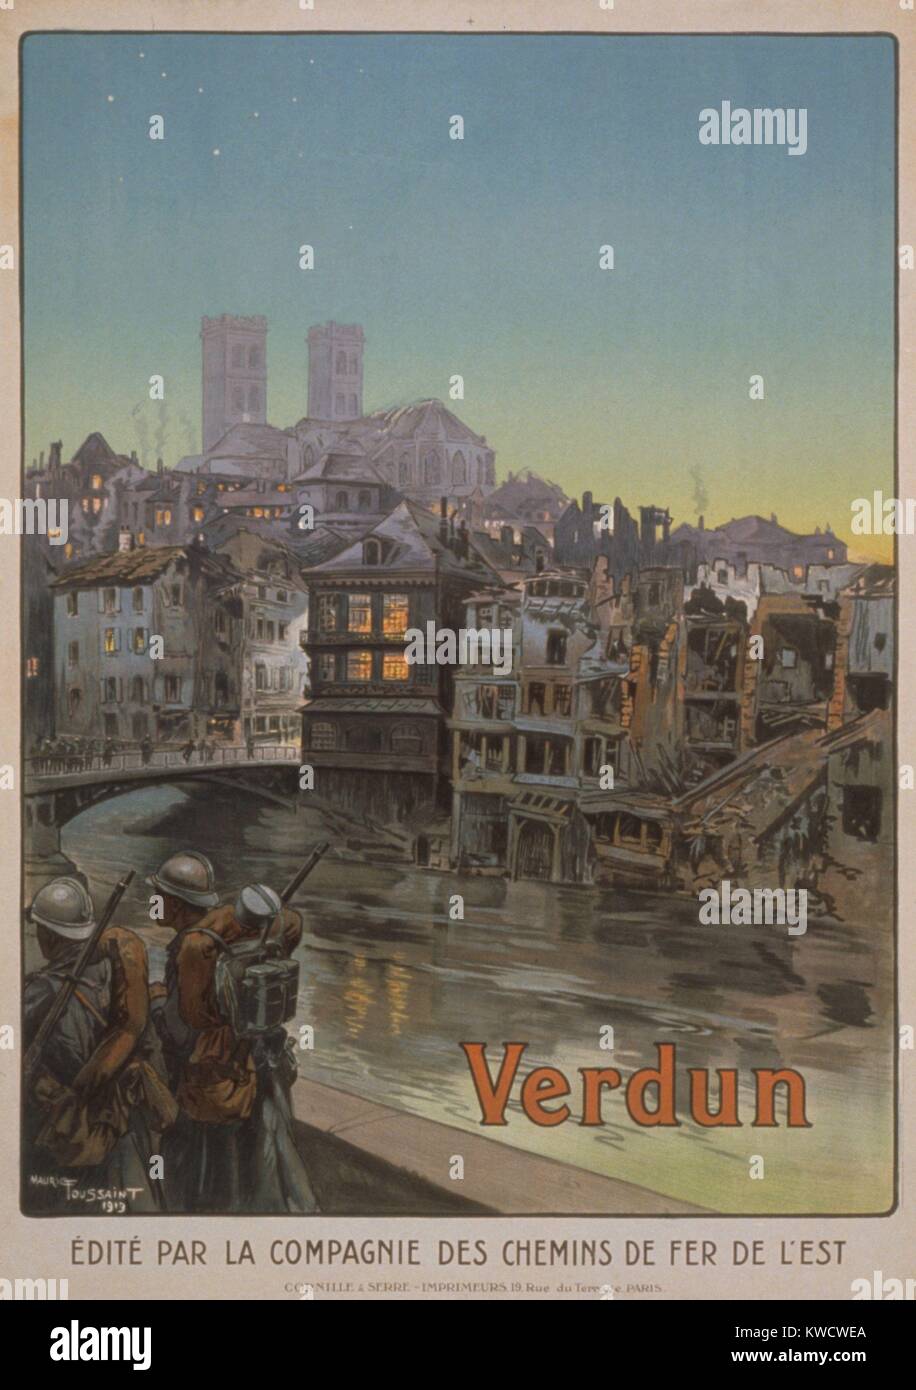 World War 1: Battle of Verdun. French poster shows soldiers marching beside a river and over a bridge into a ruined Verdun. 1919. (BSLOC 2013 1 97) Stock Photo